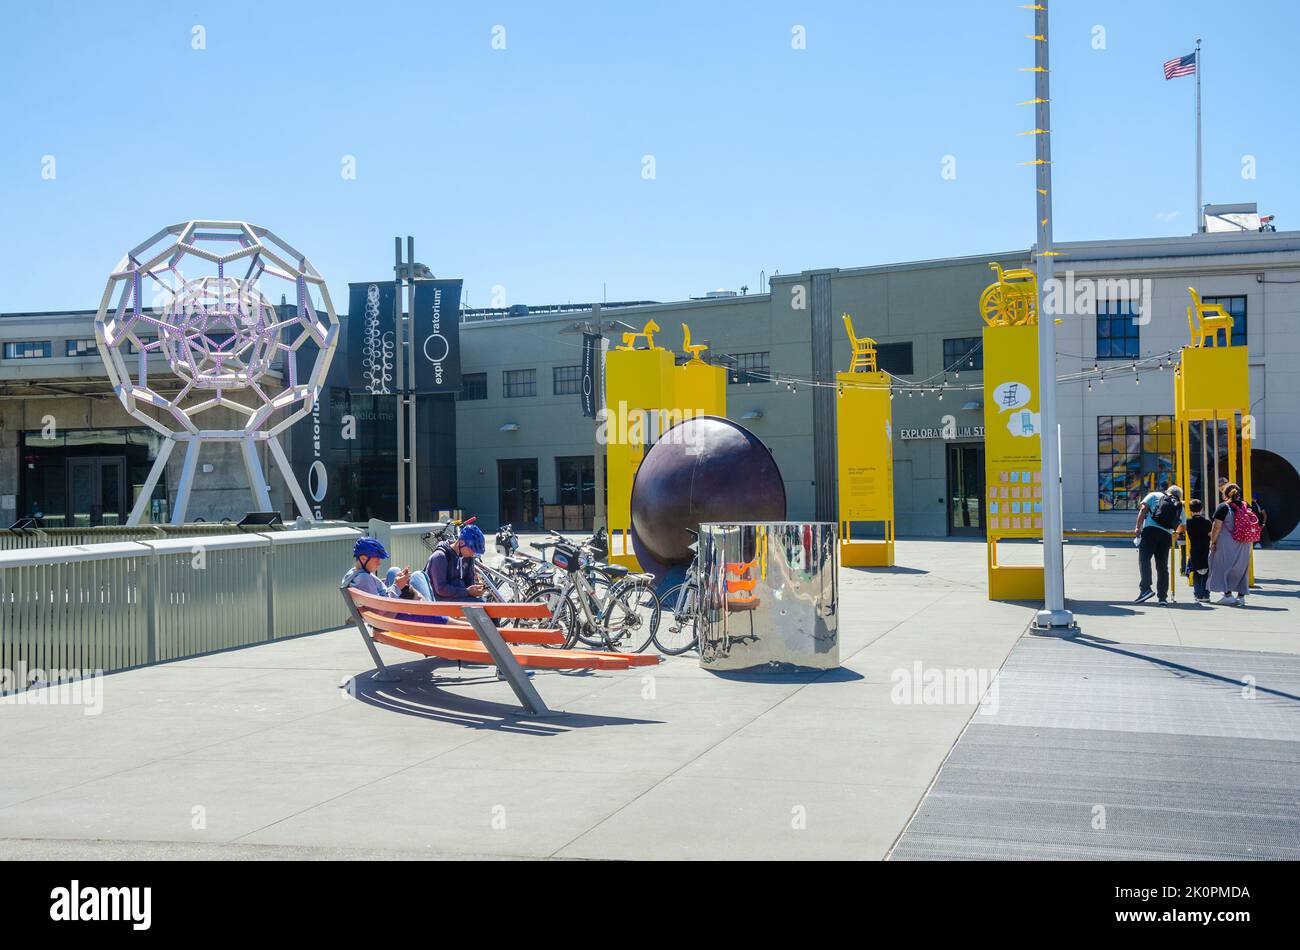 Free public exhibits and experiments outdoor on the street at The Exploratorium science and technology museum at Pier 15/17, San Francisco, California Stock Photo